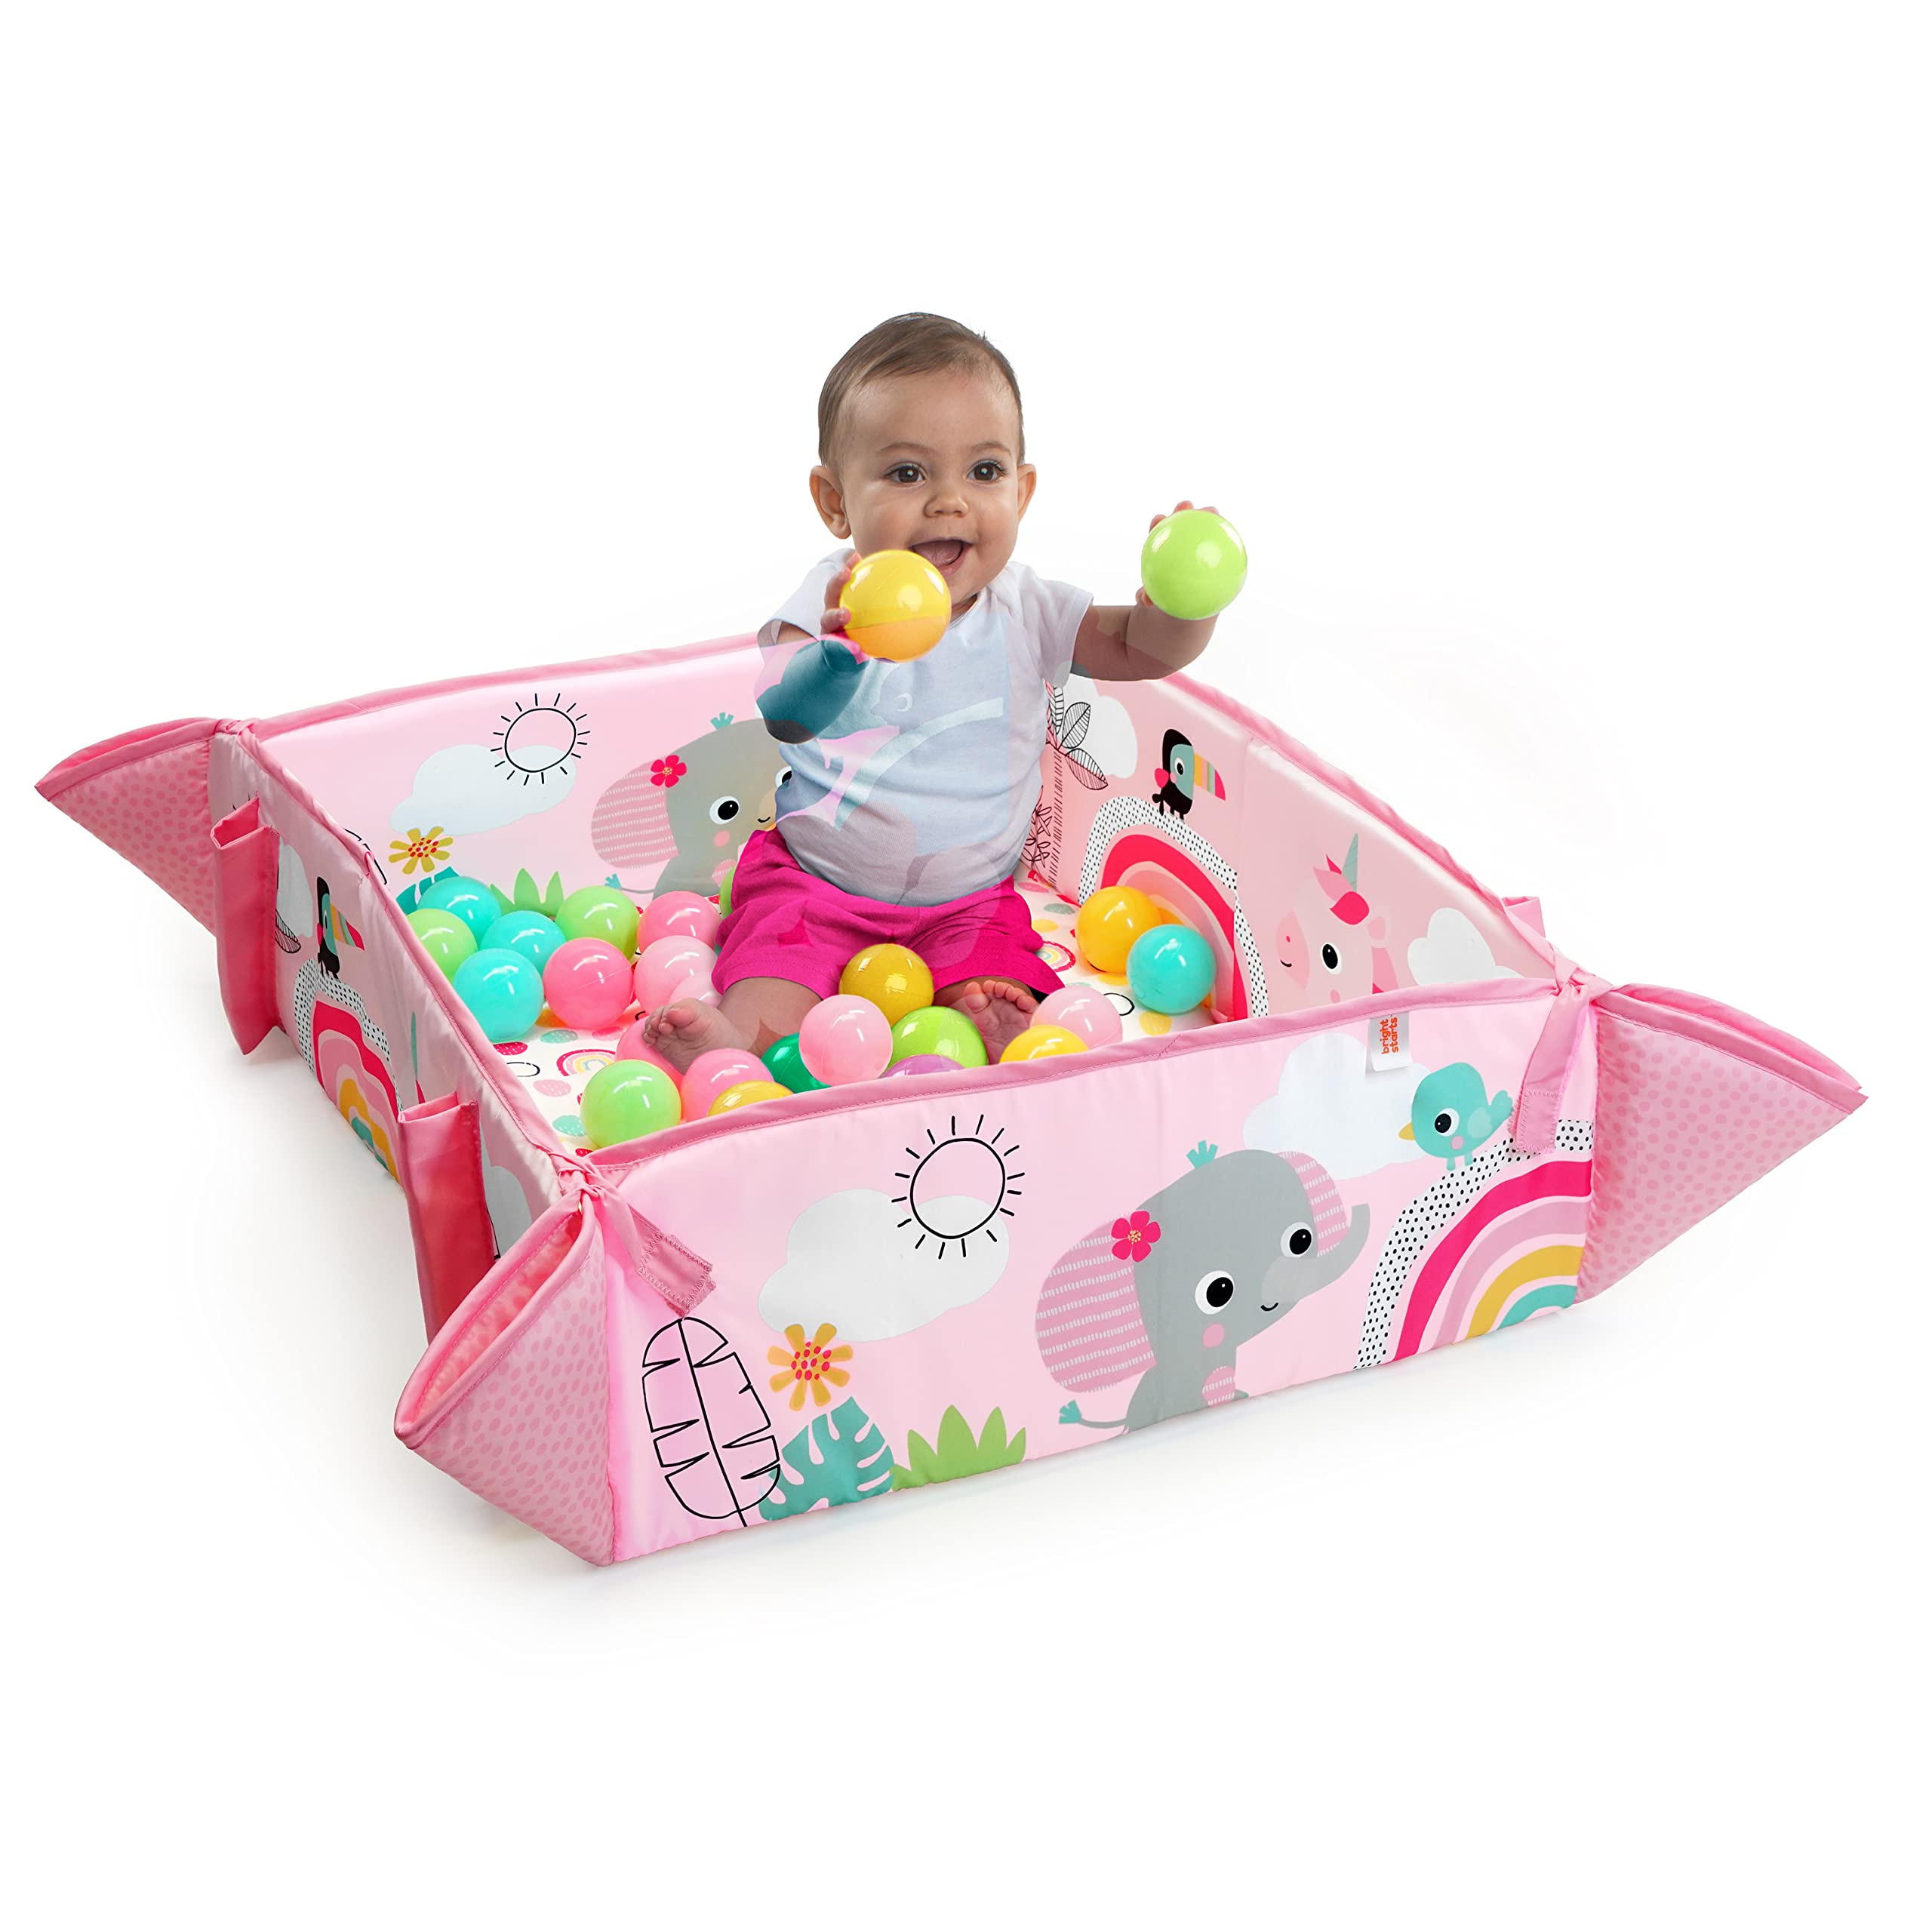 Bright Starts 5-in-1 Your Way Ball Play Baby Activity Play Gym & Ball Pit, includes 7 toys, Newborn to Toddler - Rainbow Tropics (Pink)